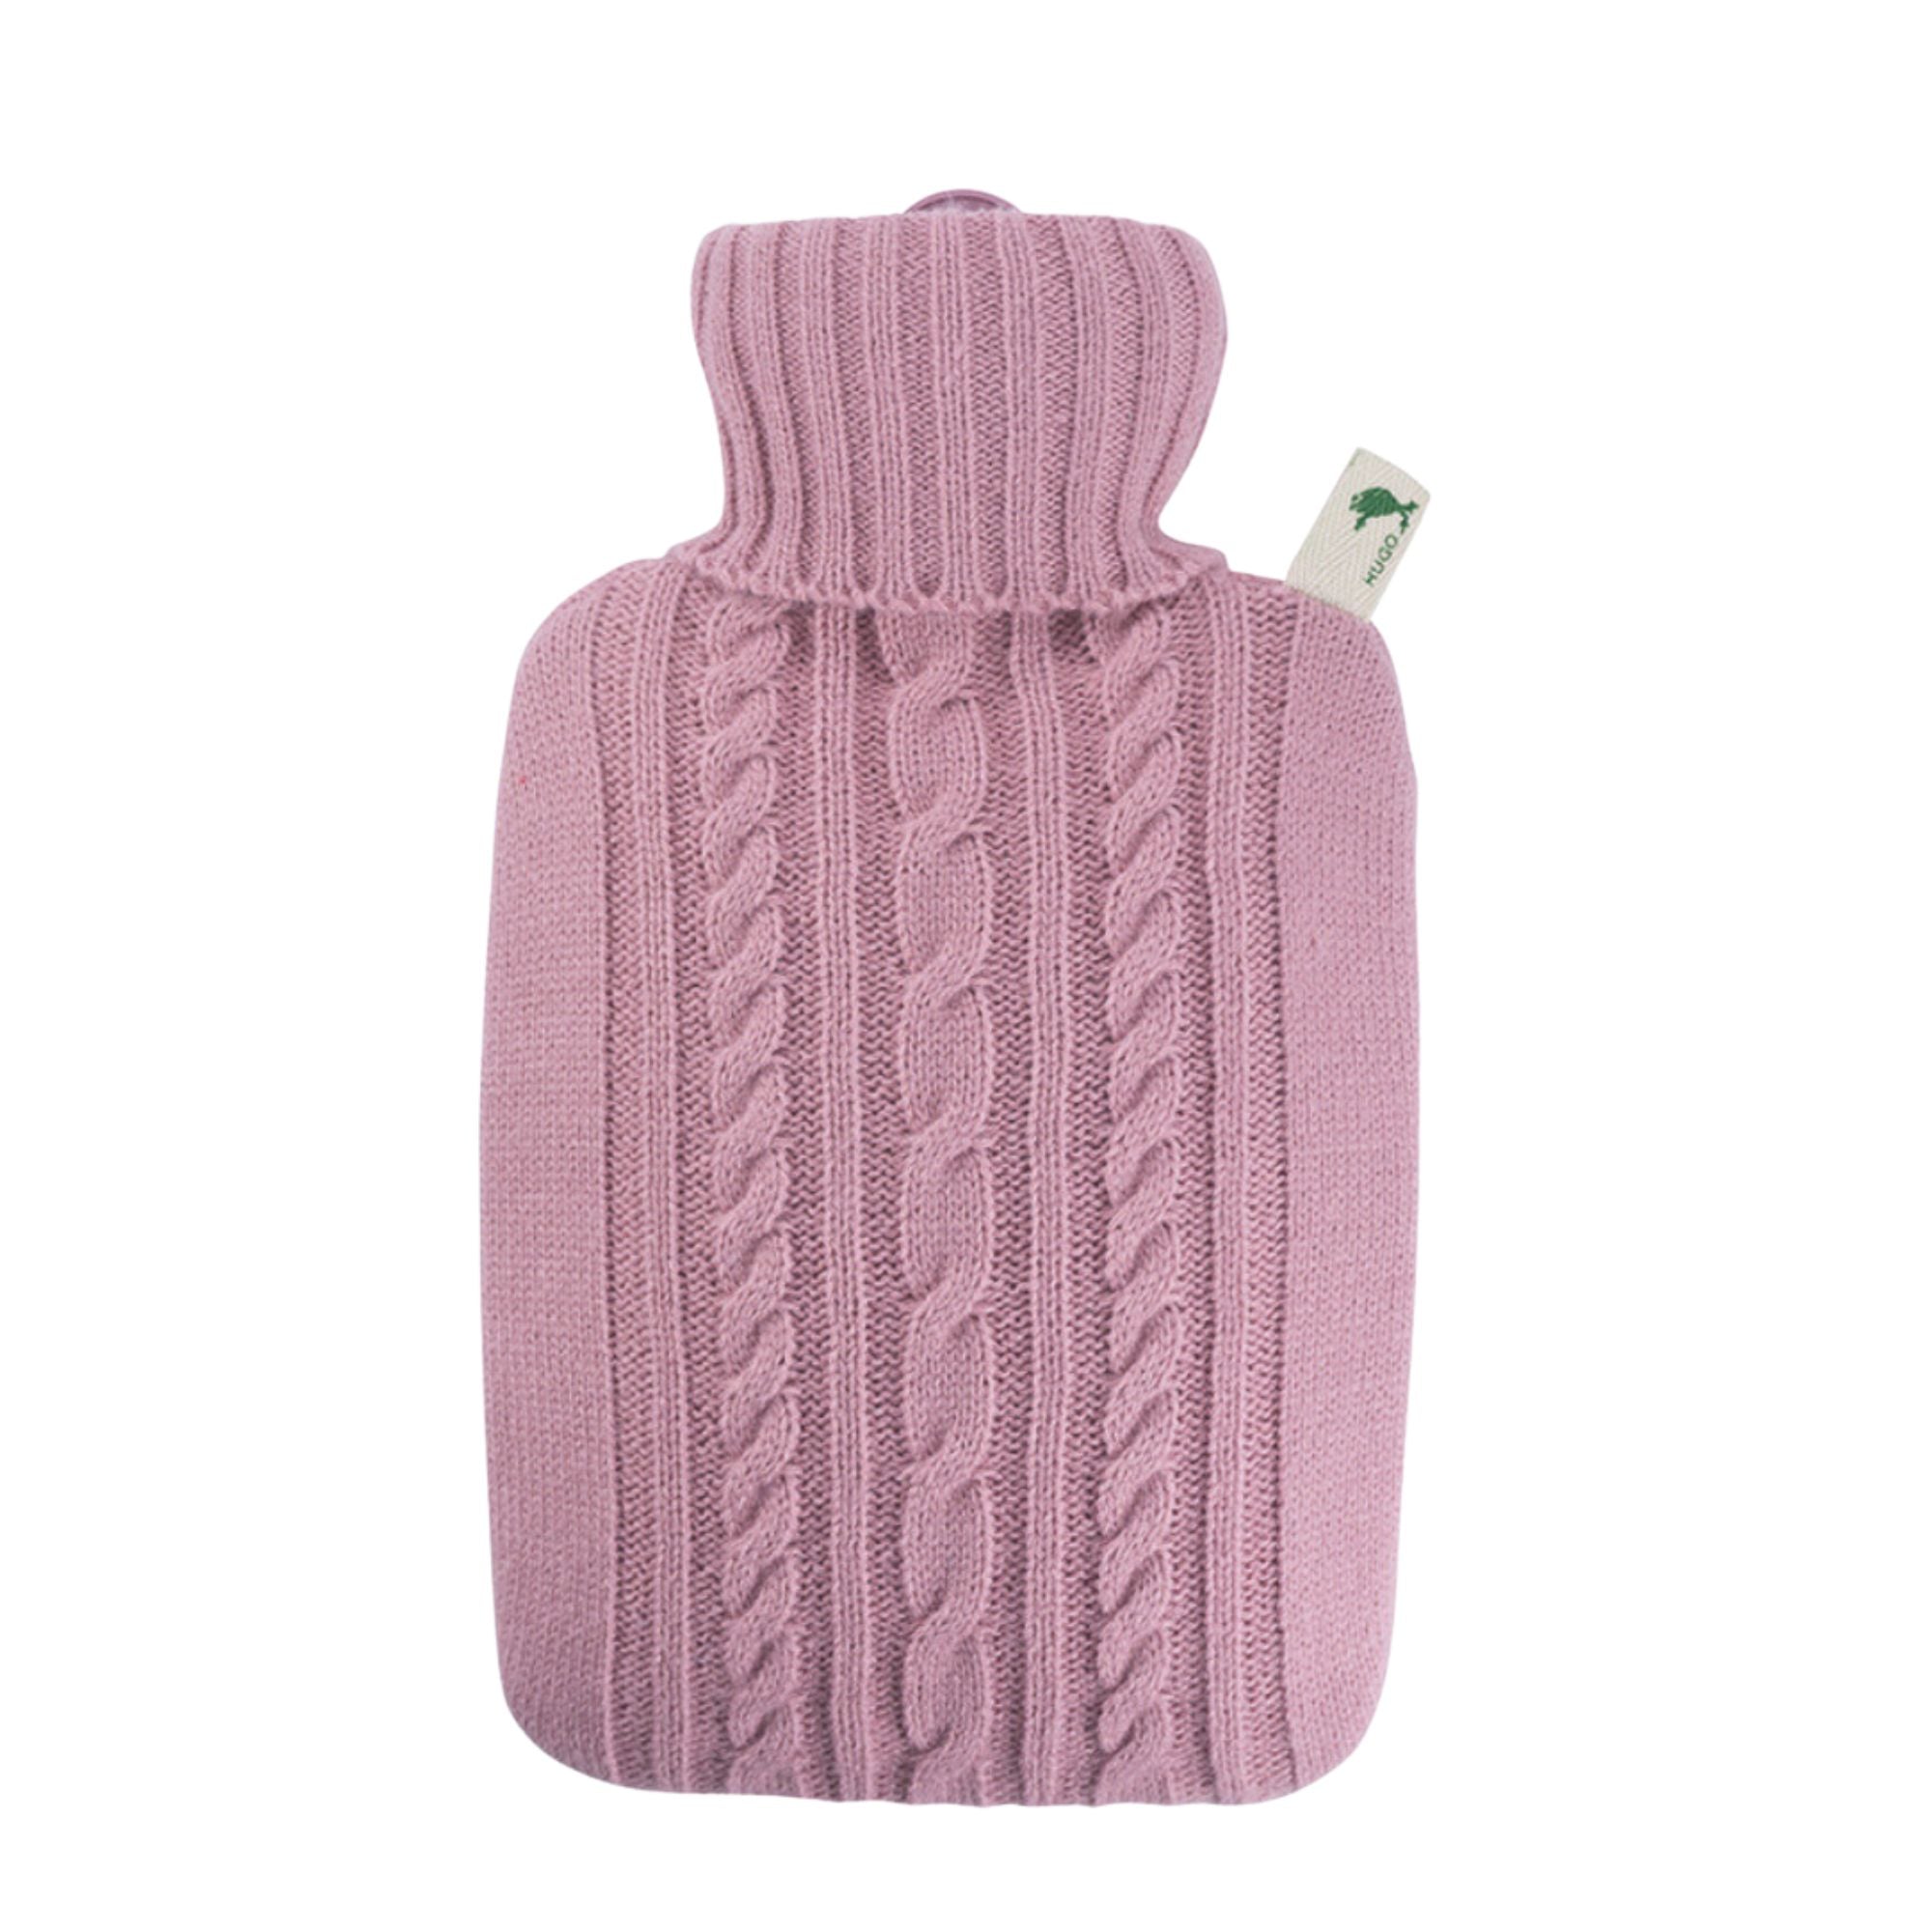 1.8 Litre Hot Water Bottle with Knitted Pastel Pink Cover (rubberless)